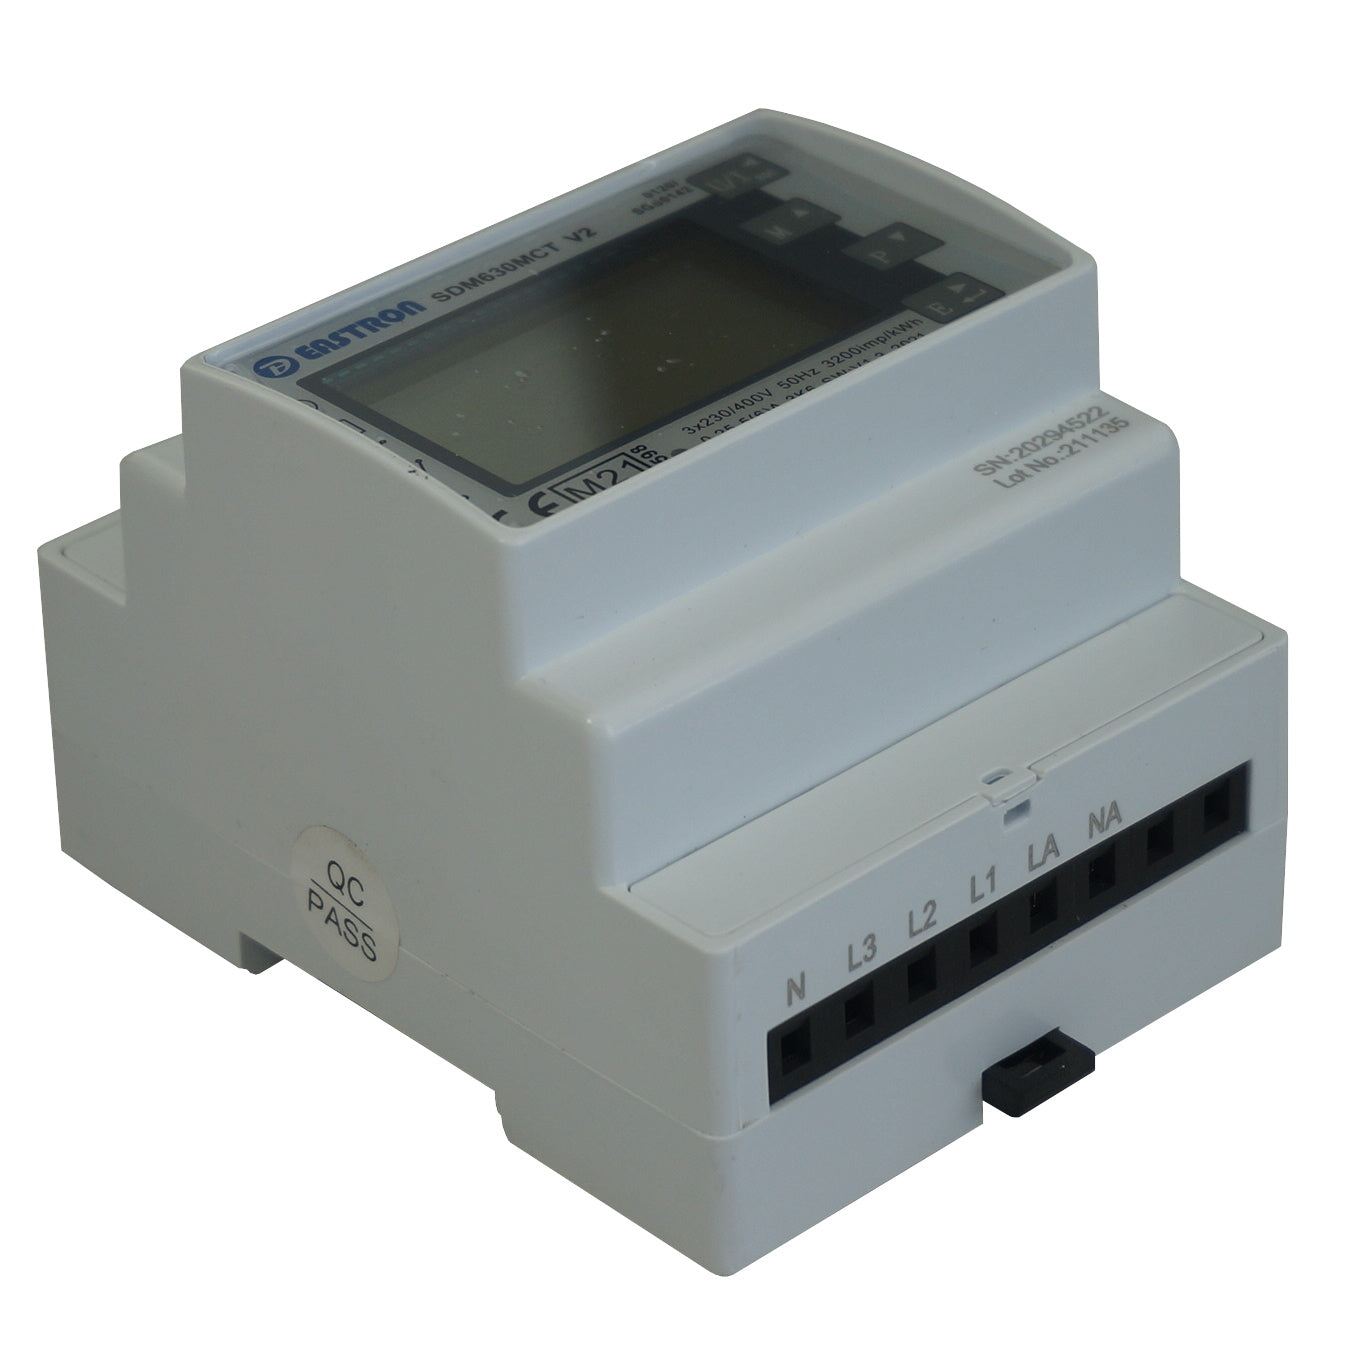 SDM630MCT-LORAWAN-MID-AS923, DIN Rail Mount kWh Meter, 3 Phase, 240VAC aux, Class 1, 1/5 Amp CT Connect, w/ 2 x pulse outputs and LoRaWaN AS923 Wireless Comms